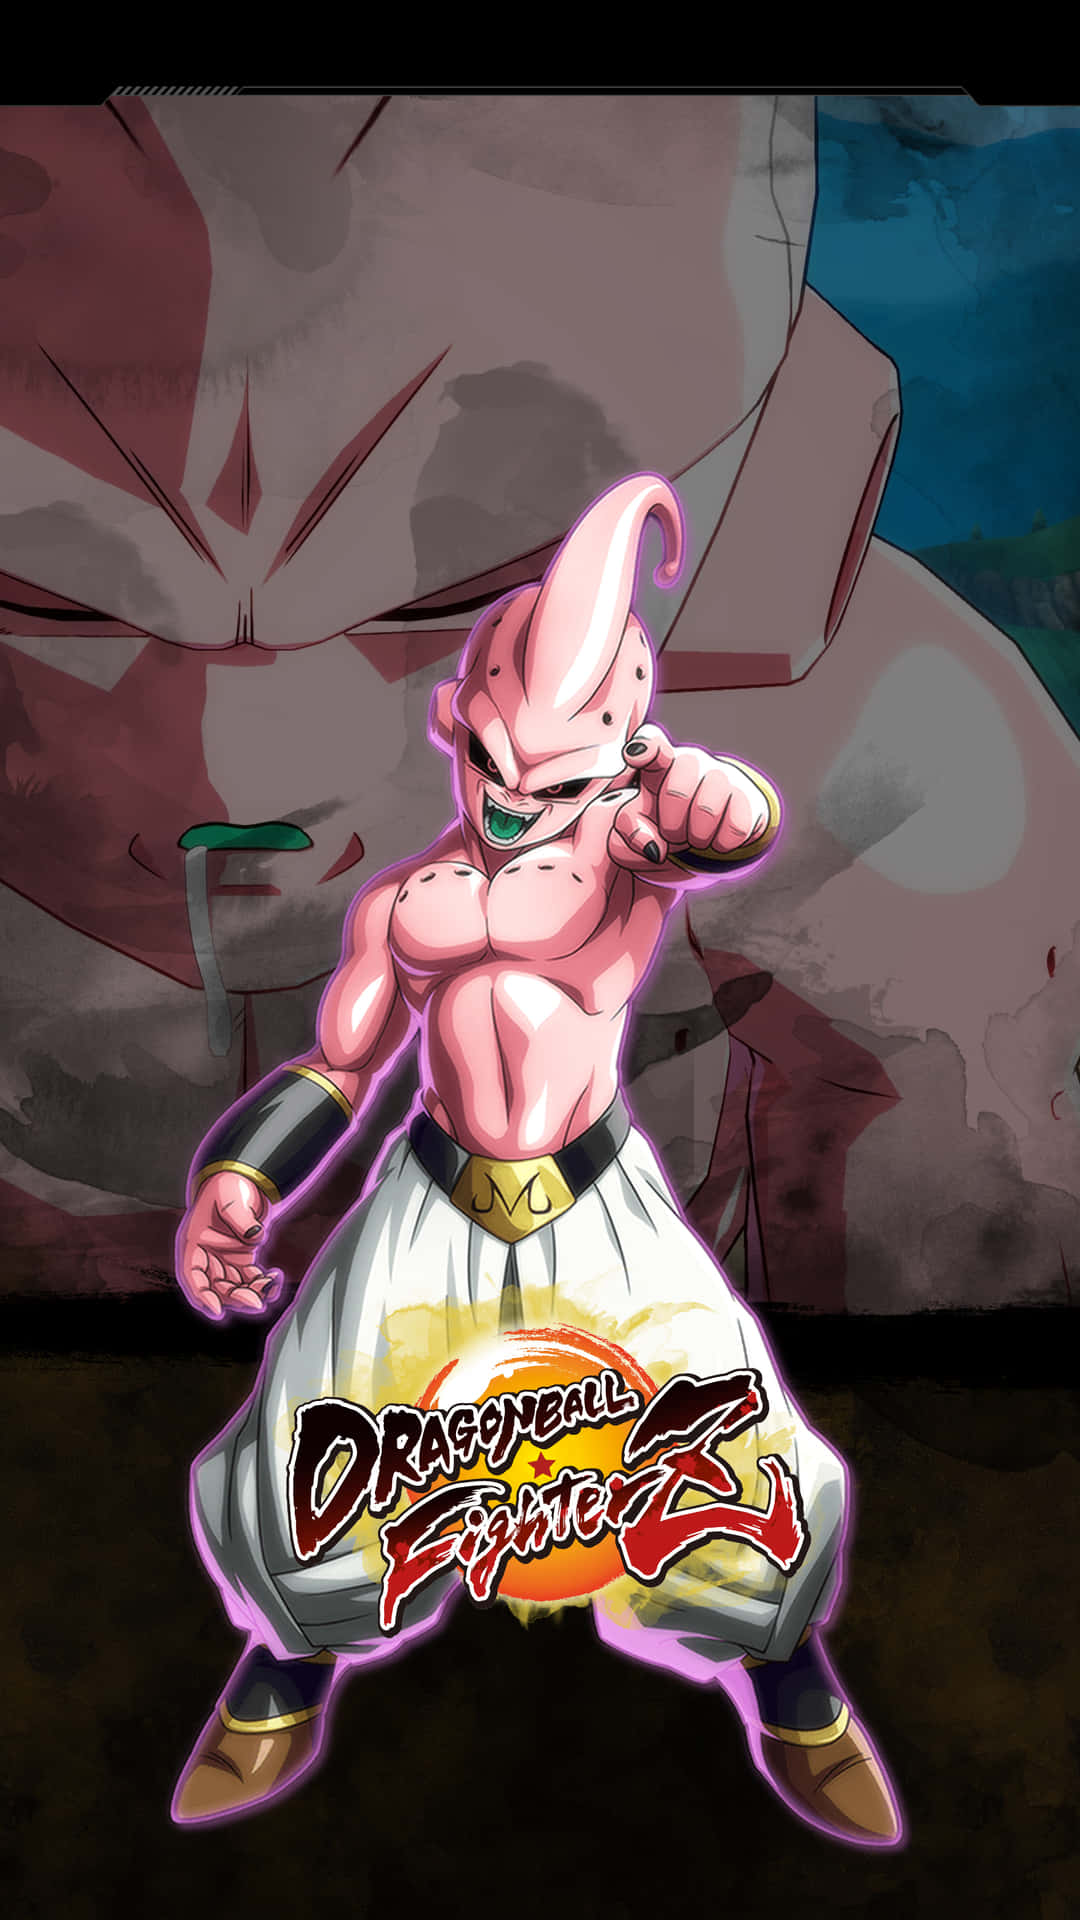 The powerful Buu stands ready to battle! Wallpaper